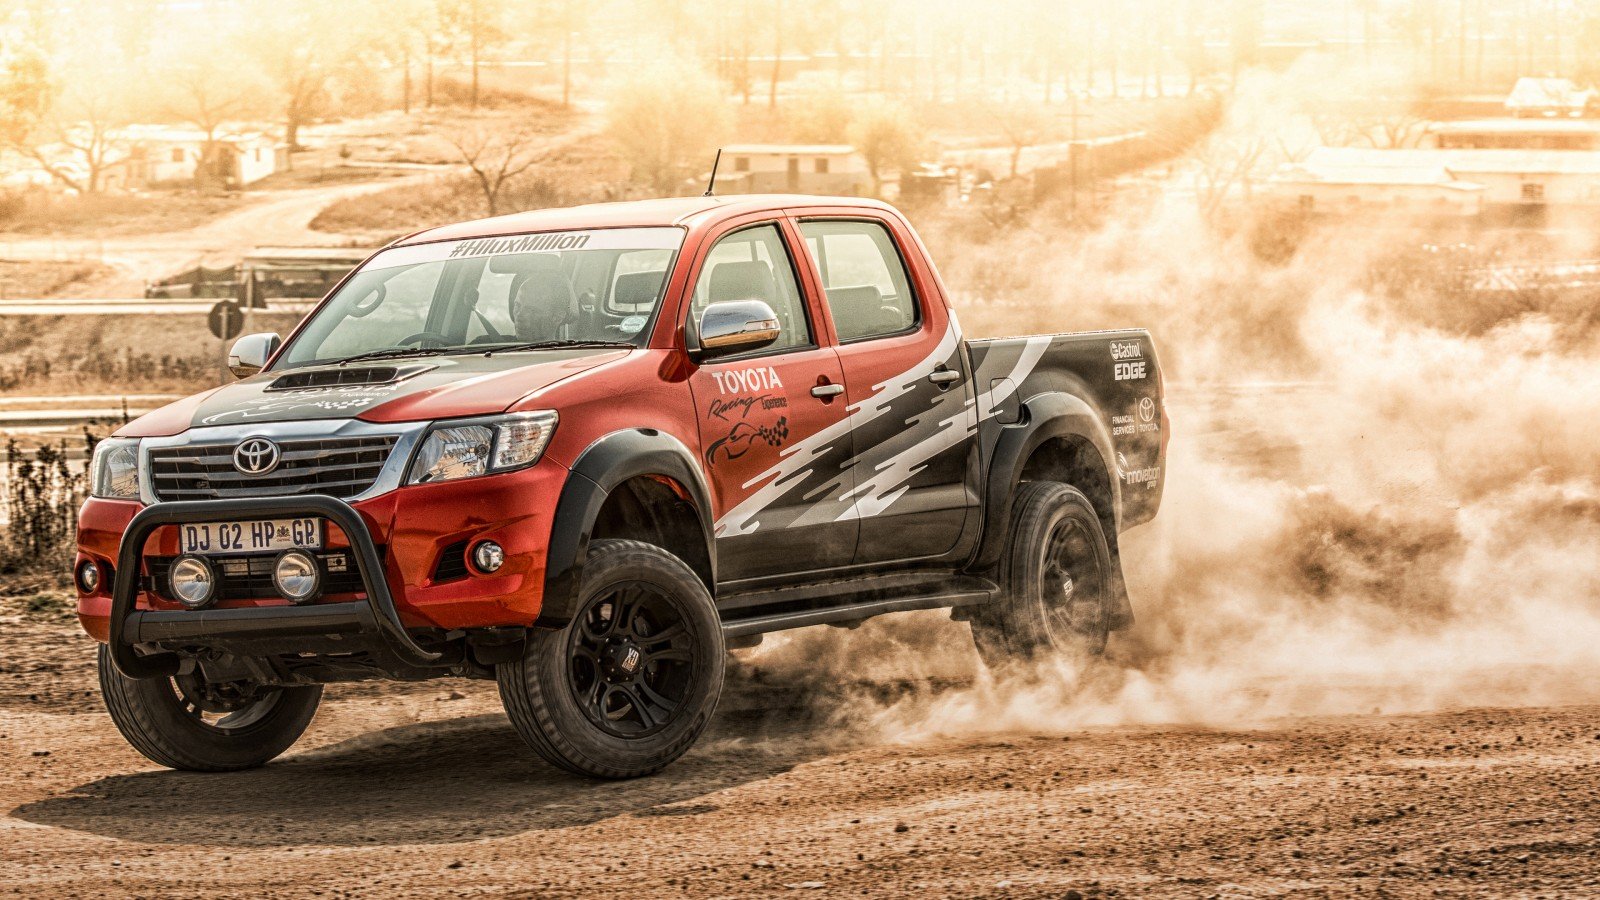 Toyota Hilux 2015 Wallpaper HD Car Wallpapers